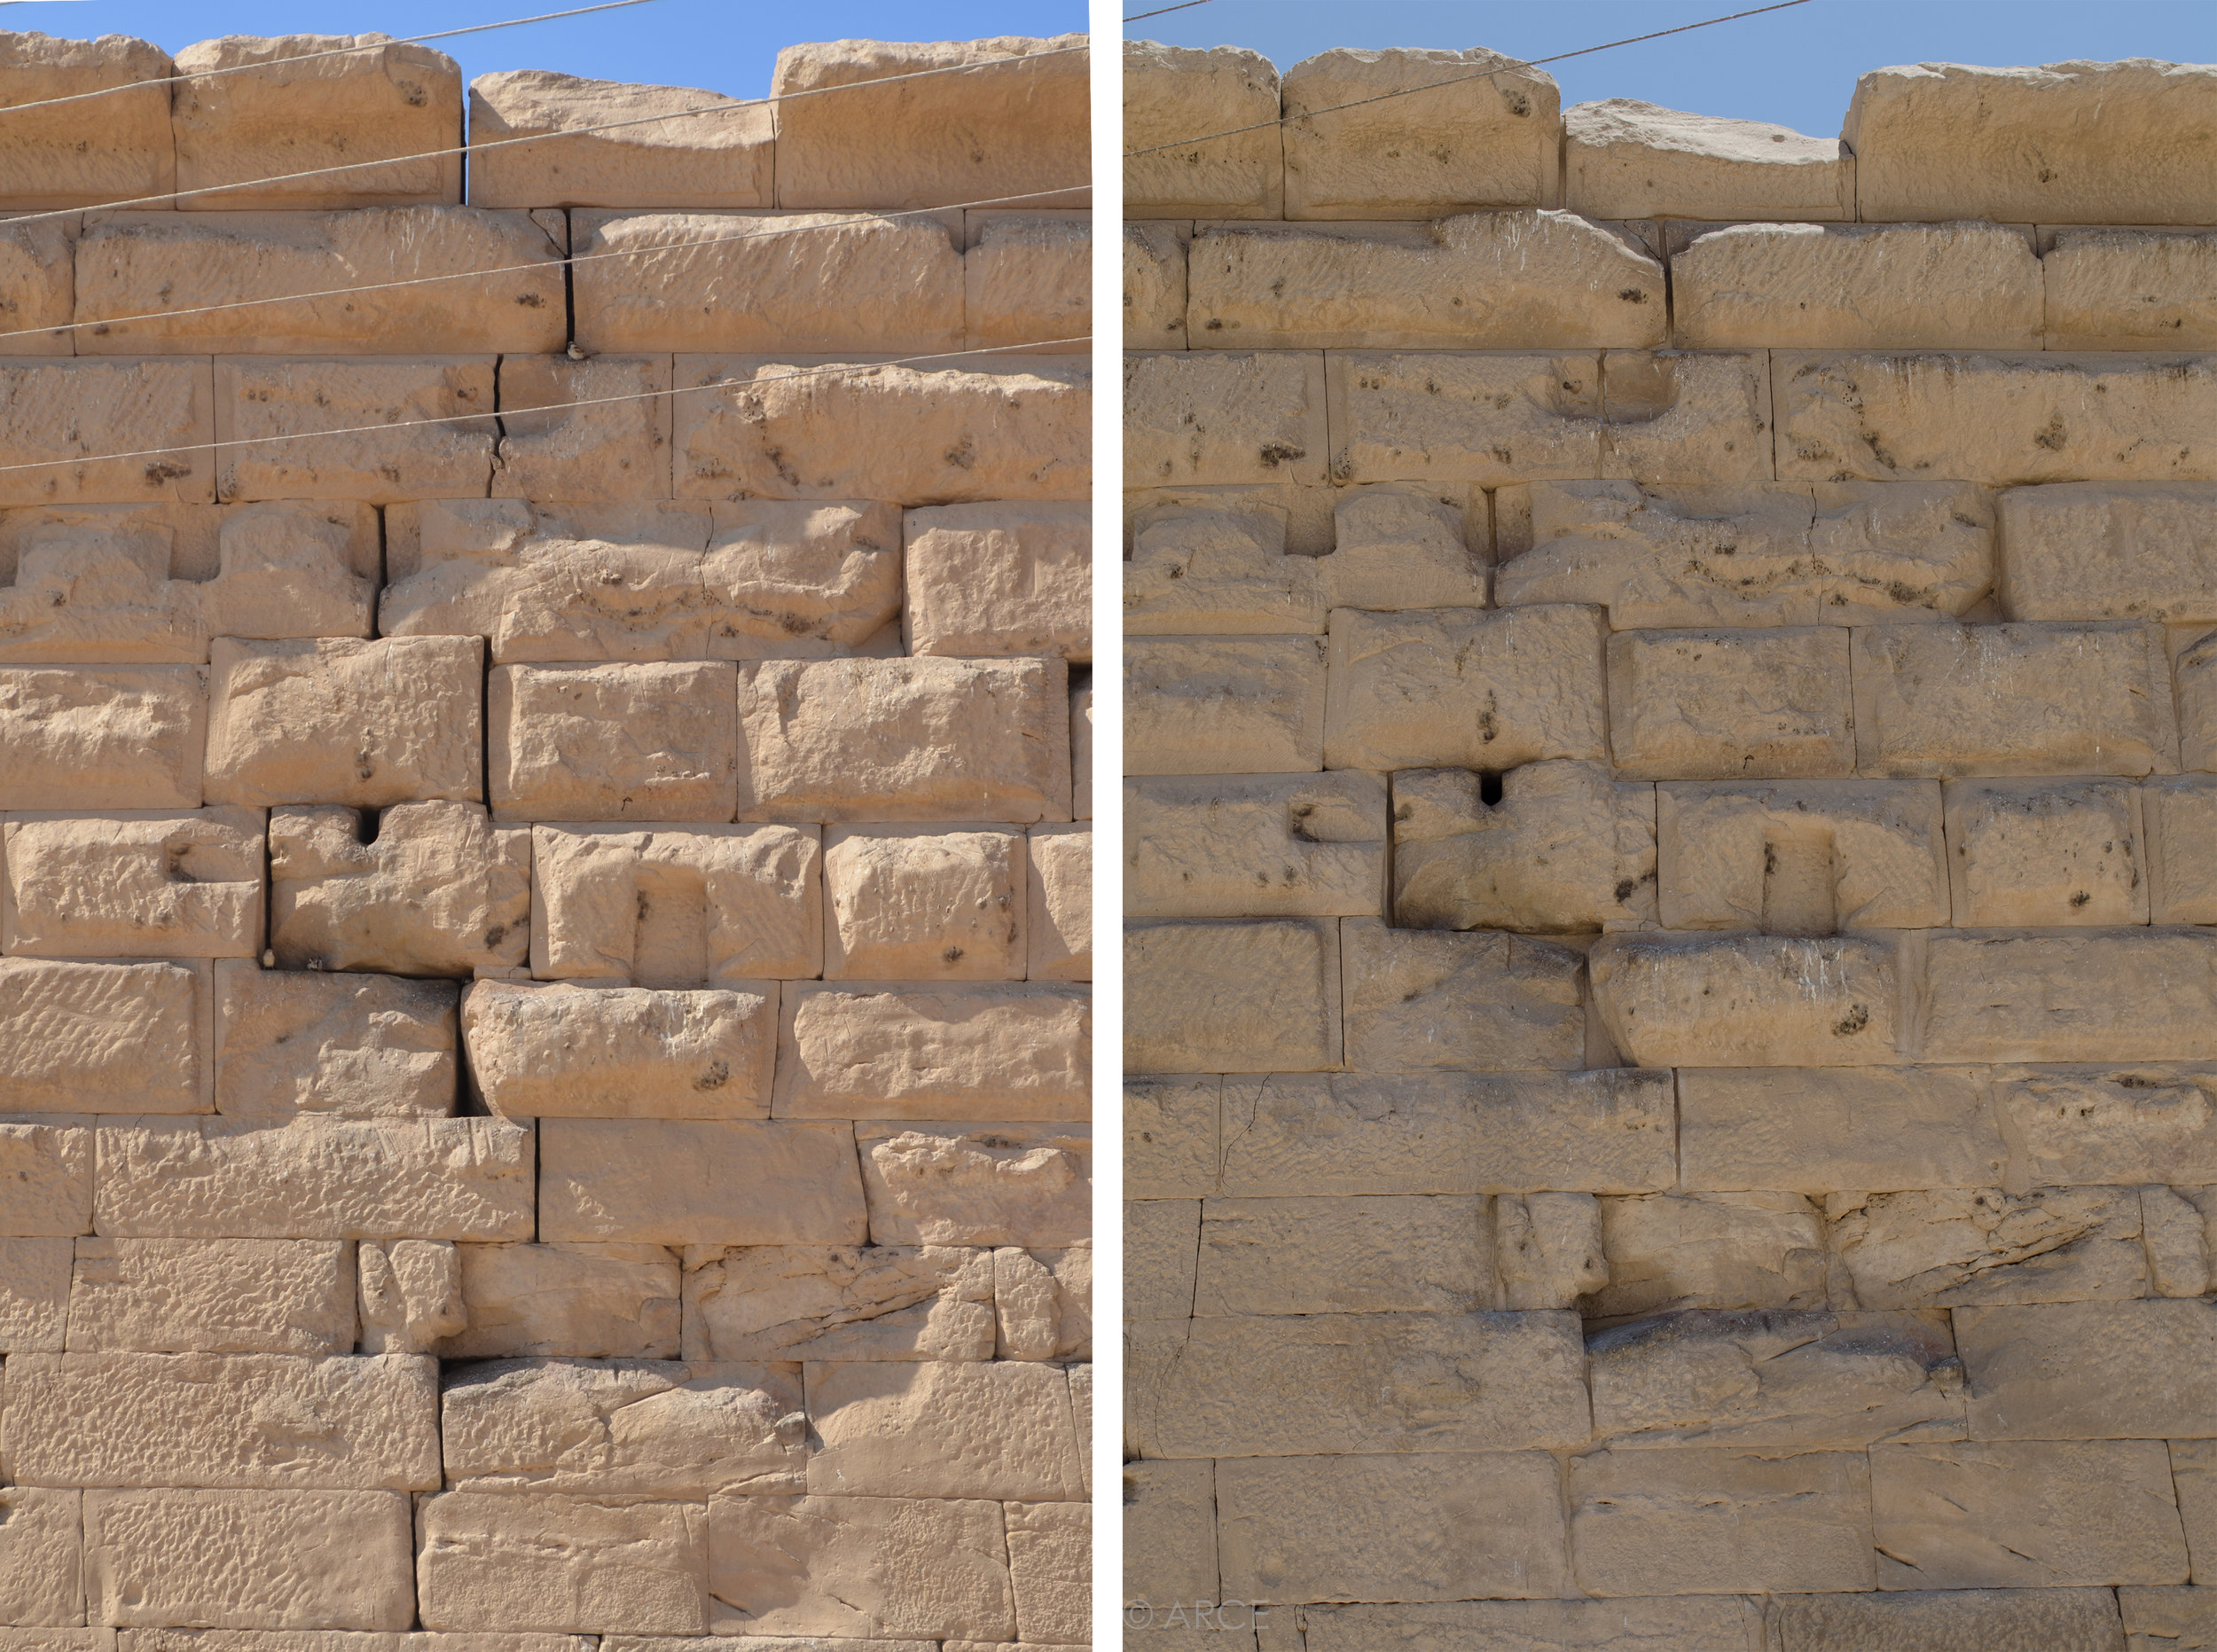  Detail of a large crack in the north facade before (left) and after (right) repointing.&nbsp;  Image © ARCE, 2012&nbsp; 